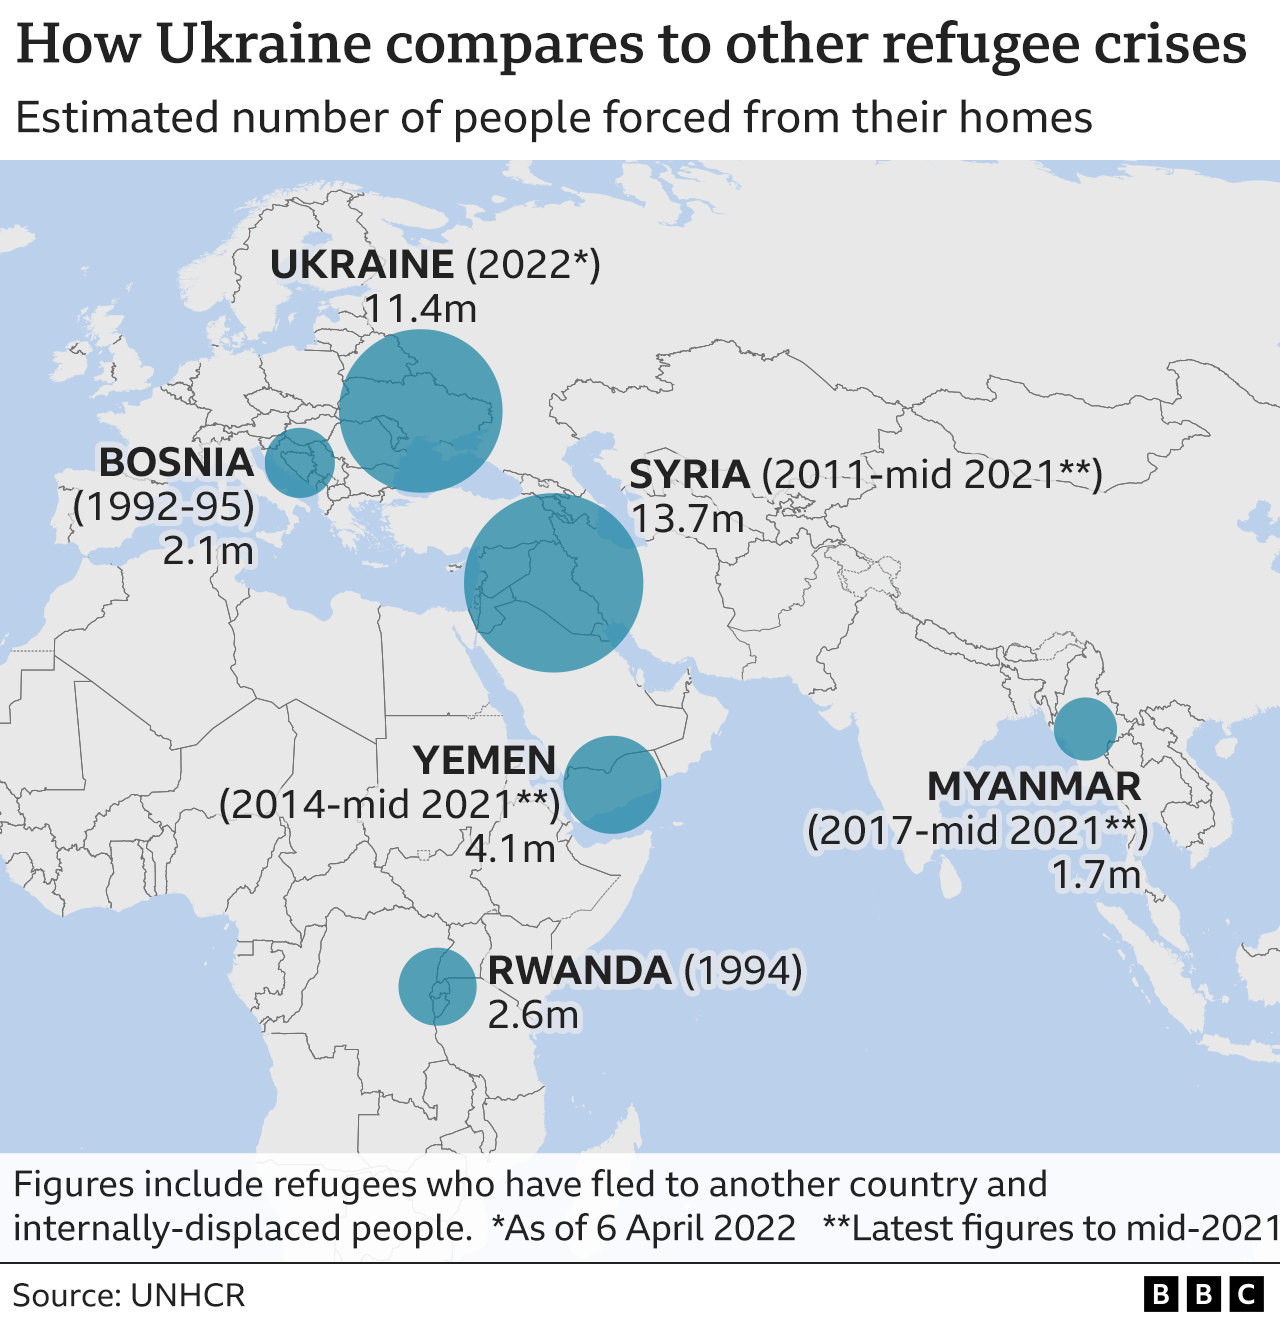 Map showing how Ukraine compares to other refugee crises - including Syria, Yemen and Rwanda